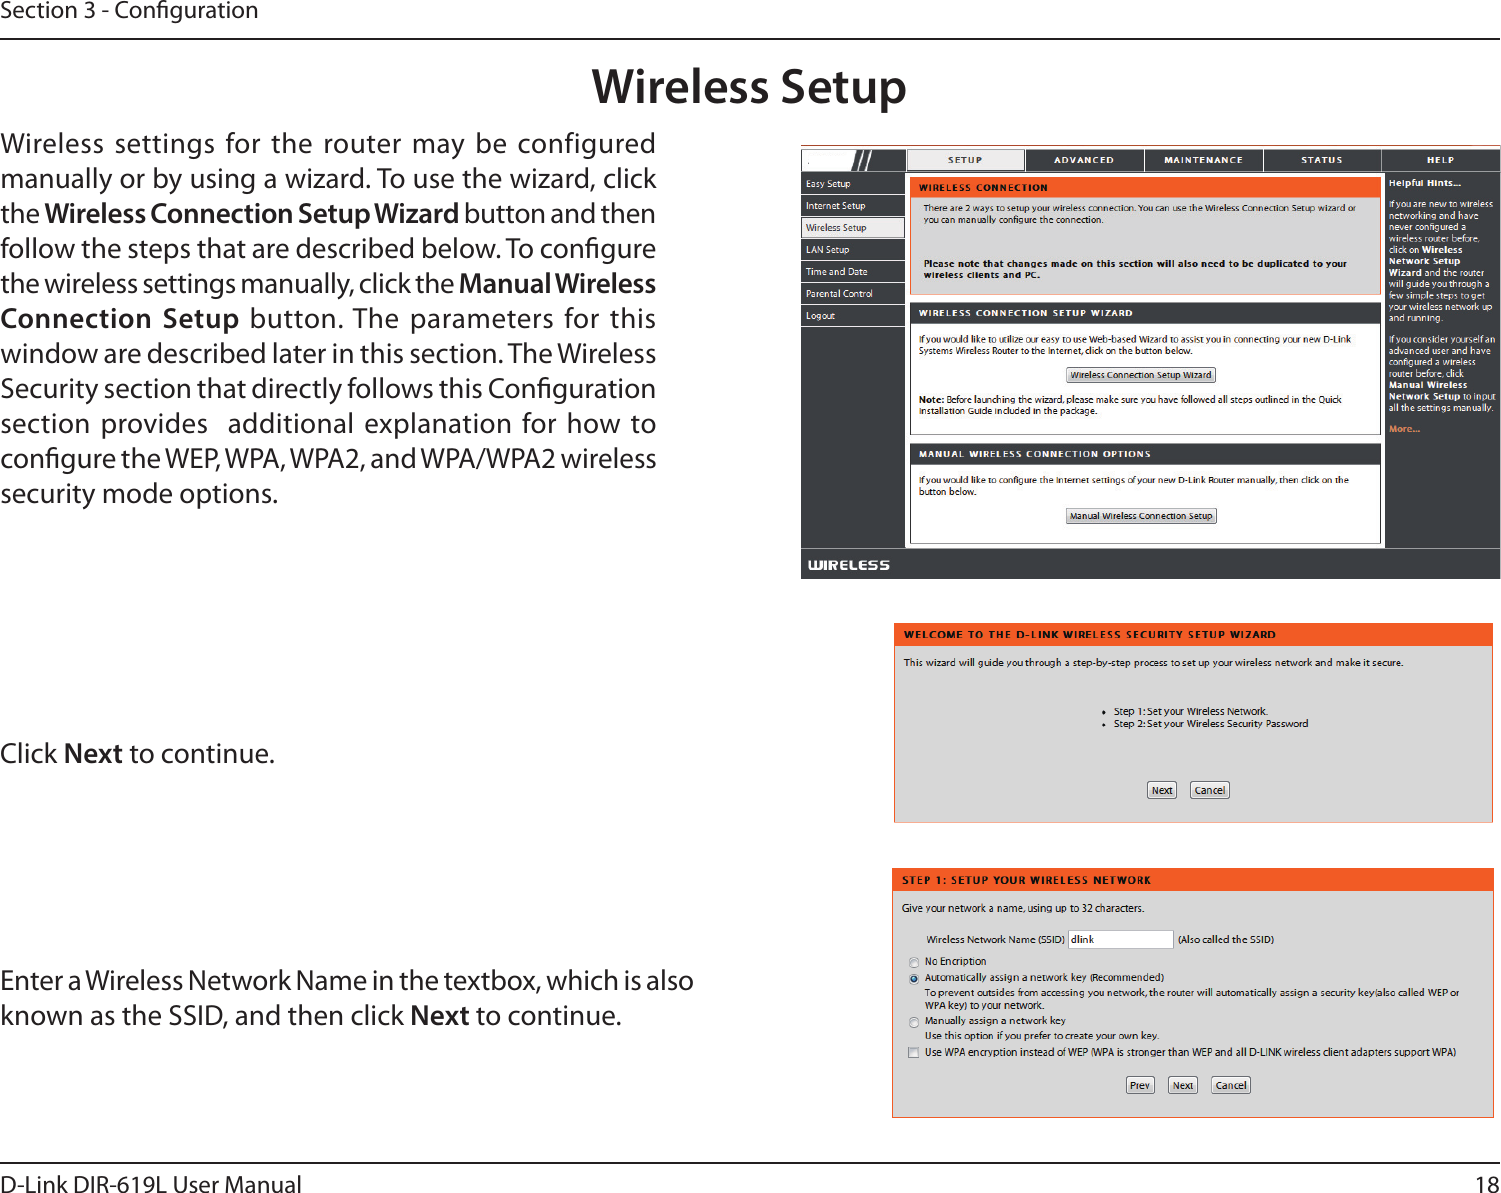 18D-Link DIR-619L User ManualSection 3 - CongurationWireless SetupWireless settings for the router may be configured manually or by using a wizard. To use the wizard, click the Wireless Connection Setup Wizard button and then follow the steps that are described below. To congure the wireless settings manually, click the Manual Wireless Connection Setup button. The parameters for this window are described later in this section. The Wireless Security section that directly follows this Conguration section  provides   additional explanation for how to congure the WEP, WPA, WPA2, and WPA/WPA2 wireless security mode options. Click Next to continue.Enter a Wireless Network Name in the textbox, which is also known as the SSID, and then click Next to continue.DIR-619L